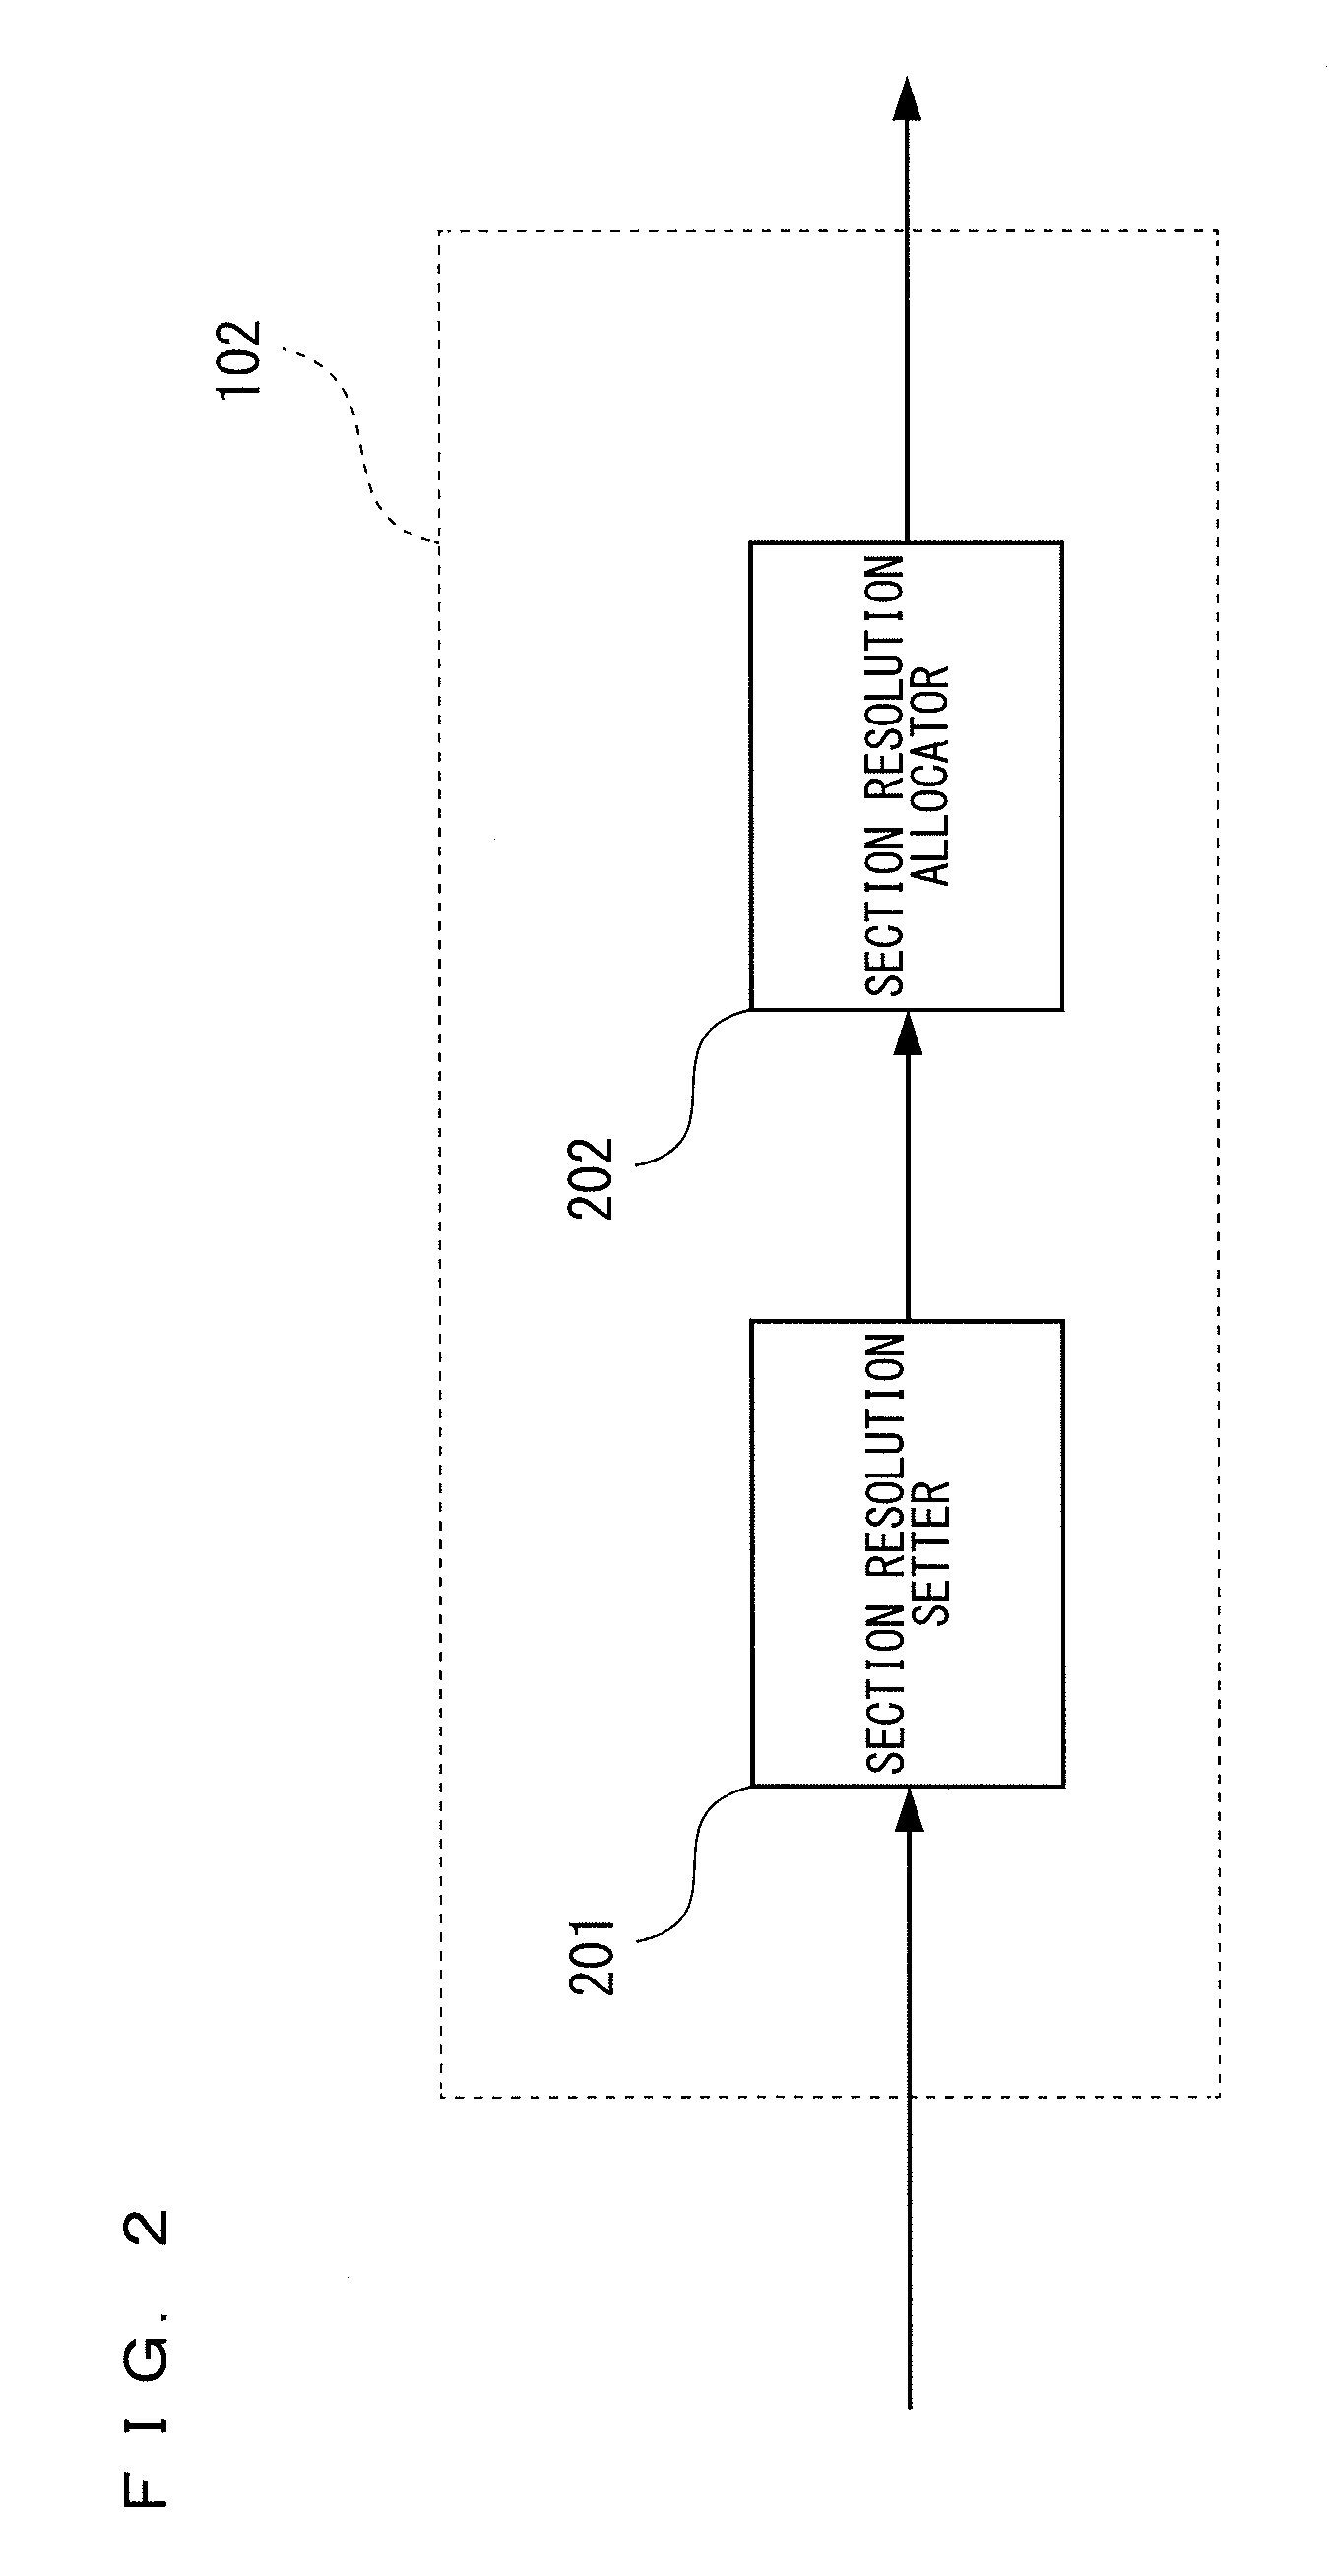 Vehicle energy-management device for controlling energy consumption along a travel route